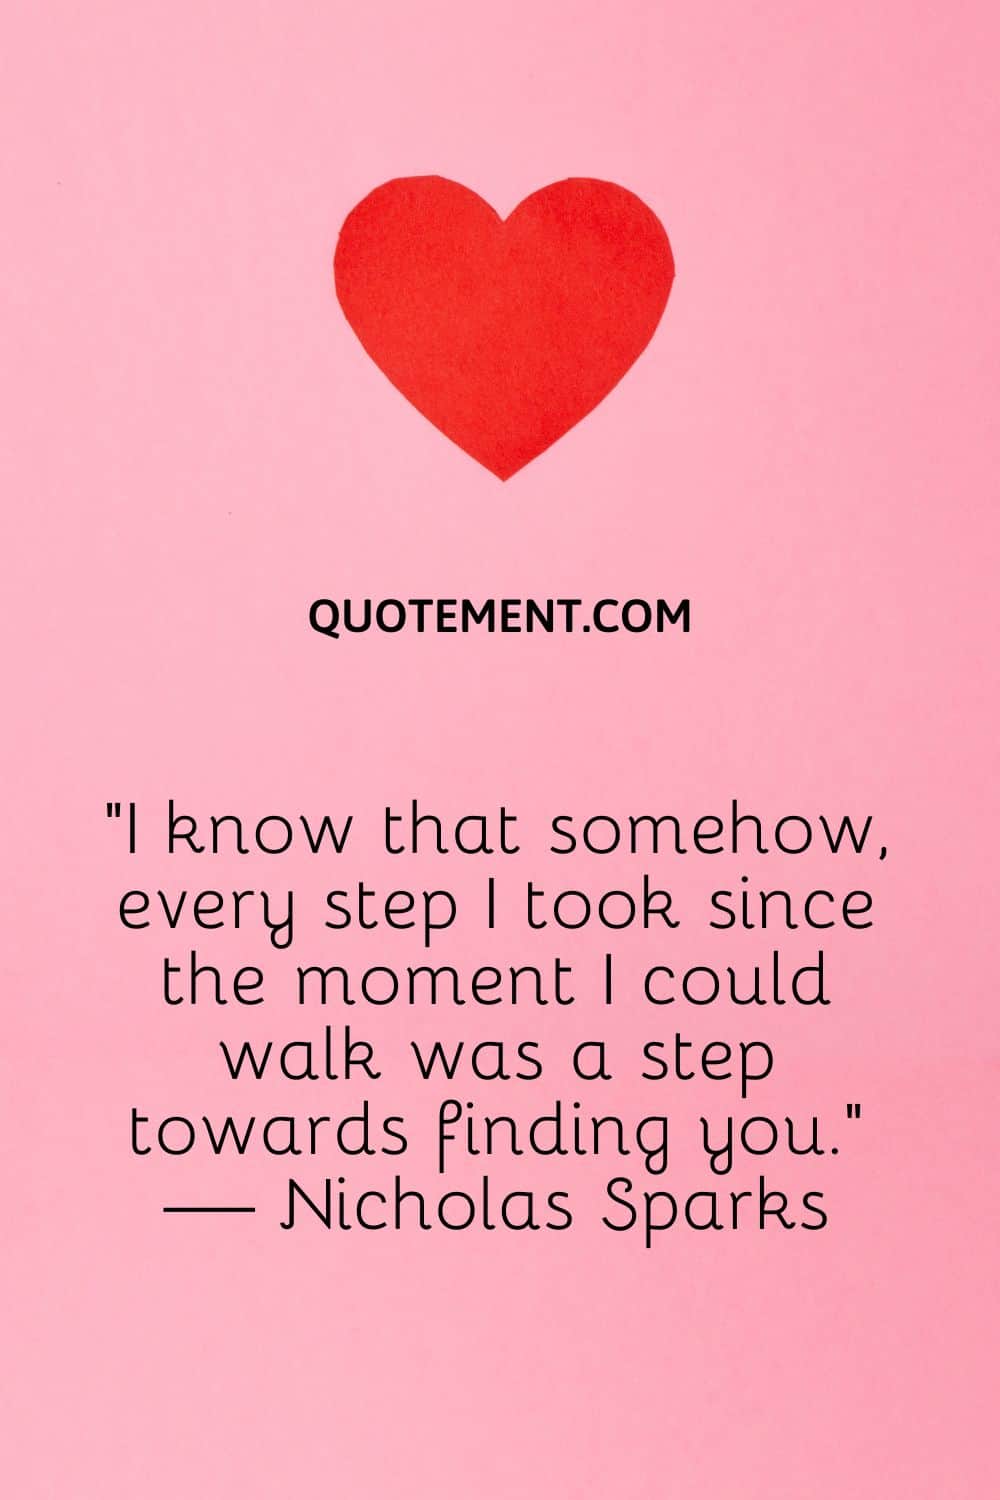 I know that somehow, every step I took since the moment I could walk was a step towards finding you